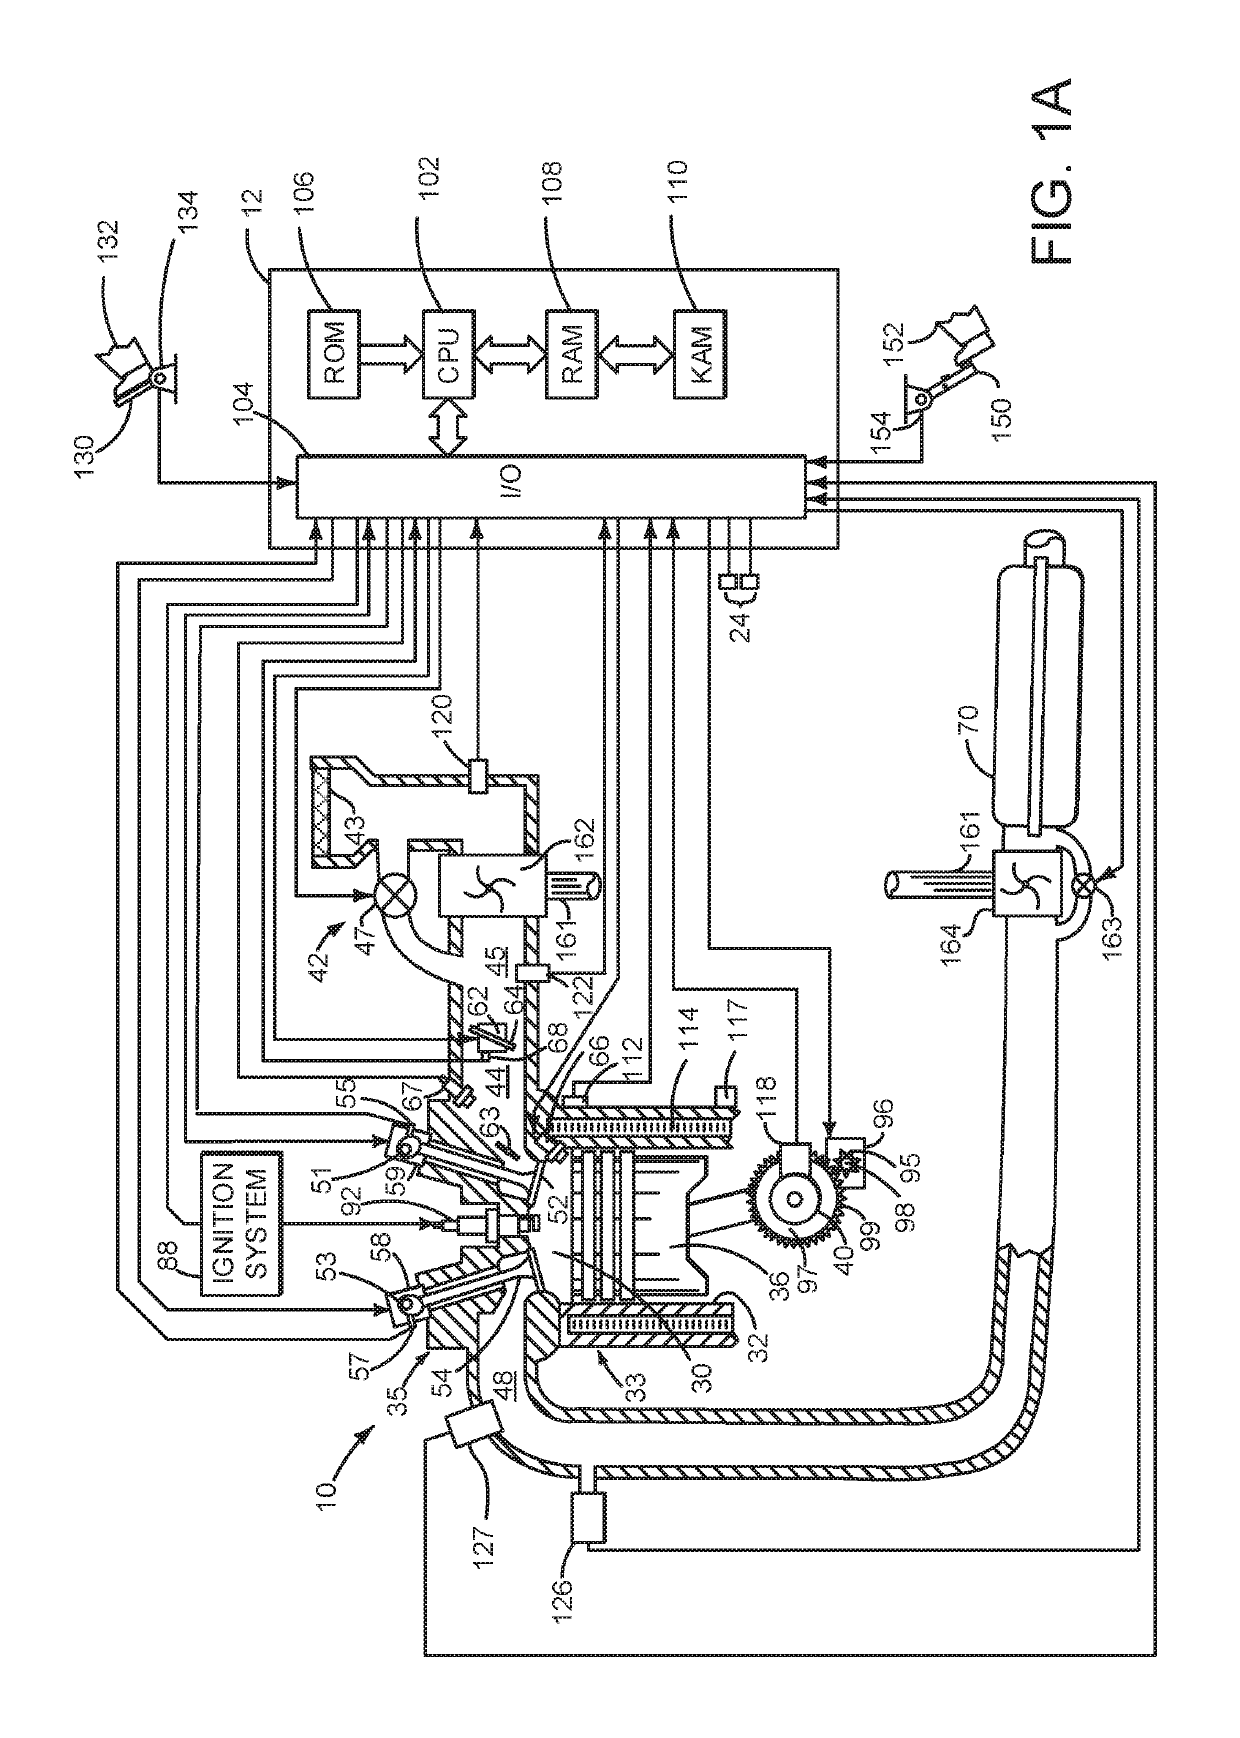 System and method for controlling fuel for reactivating engine cylinders